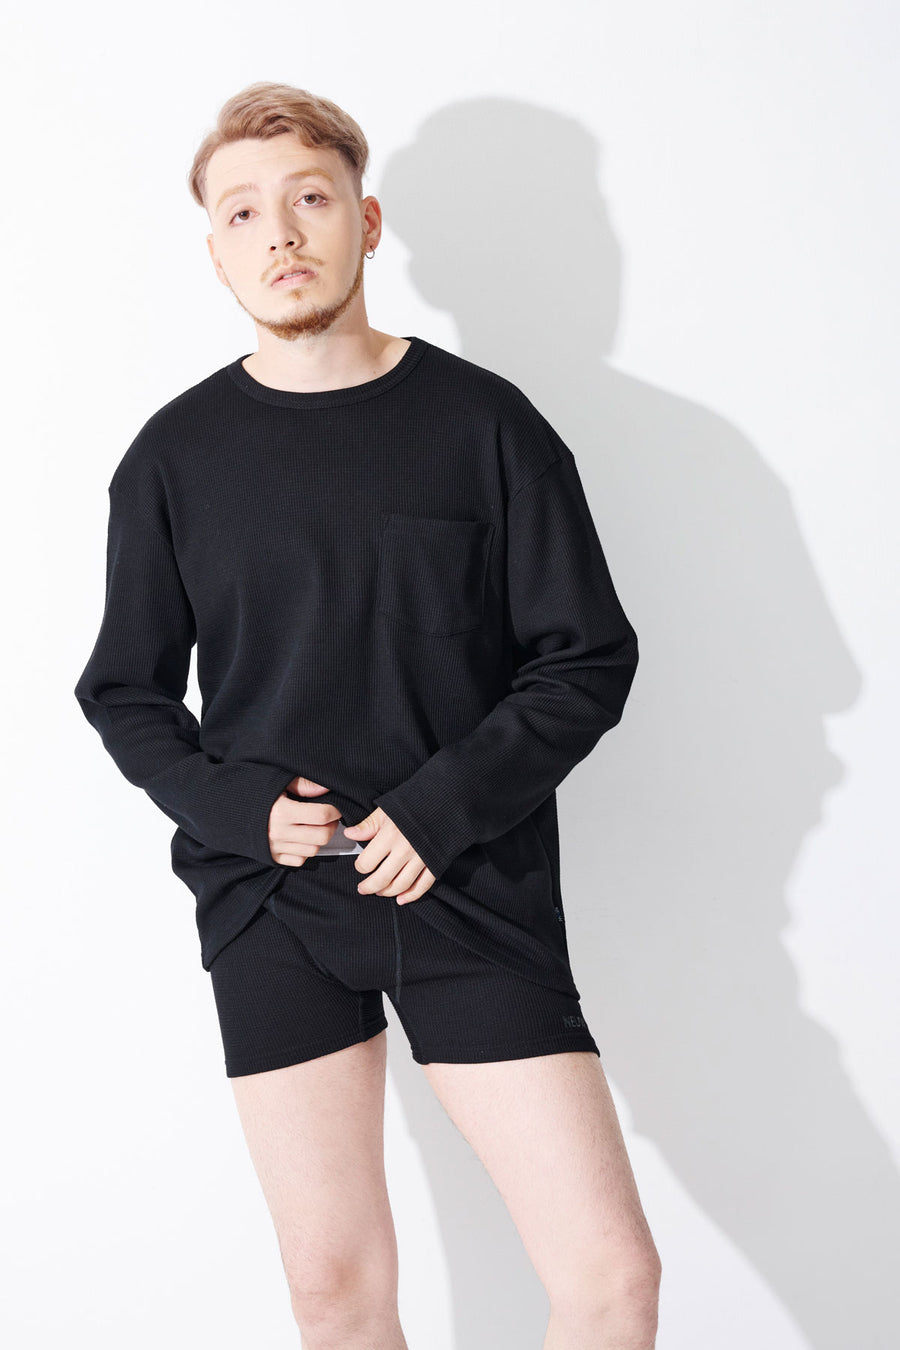 Relux wear BOXER（Waffle）Black [New Color]